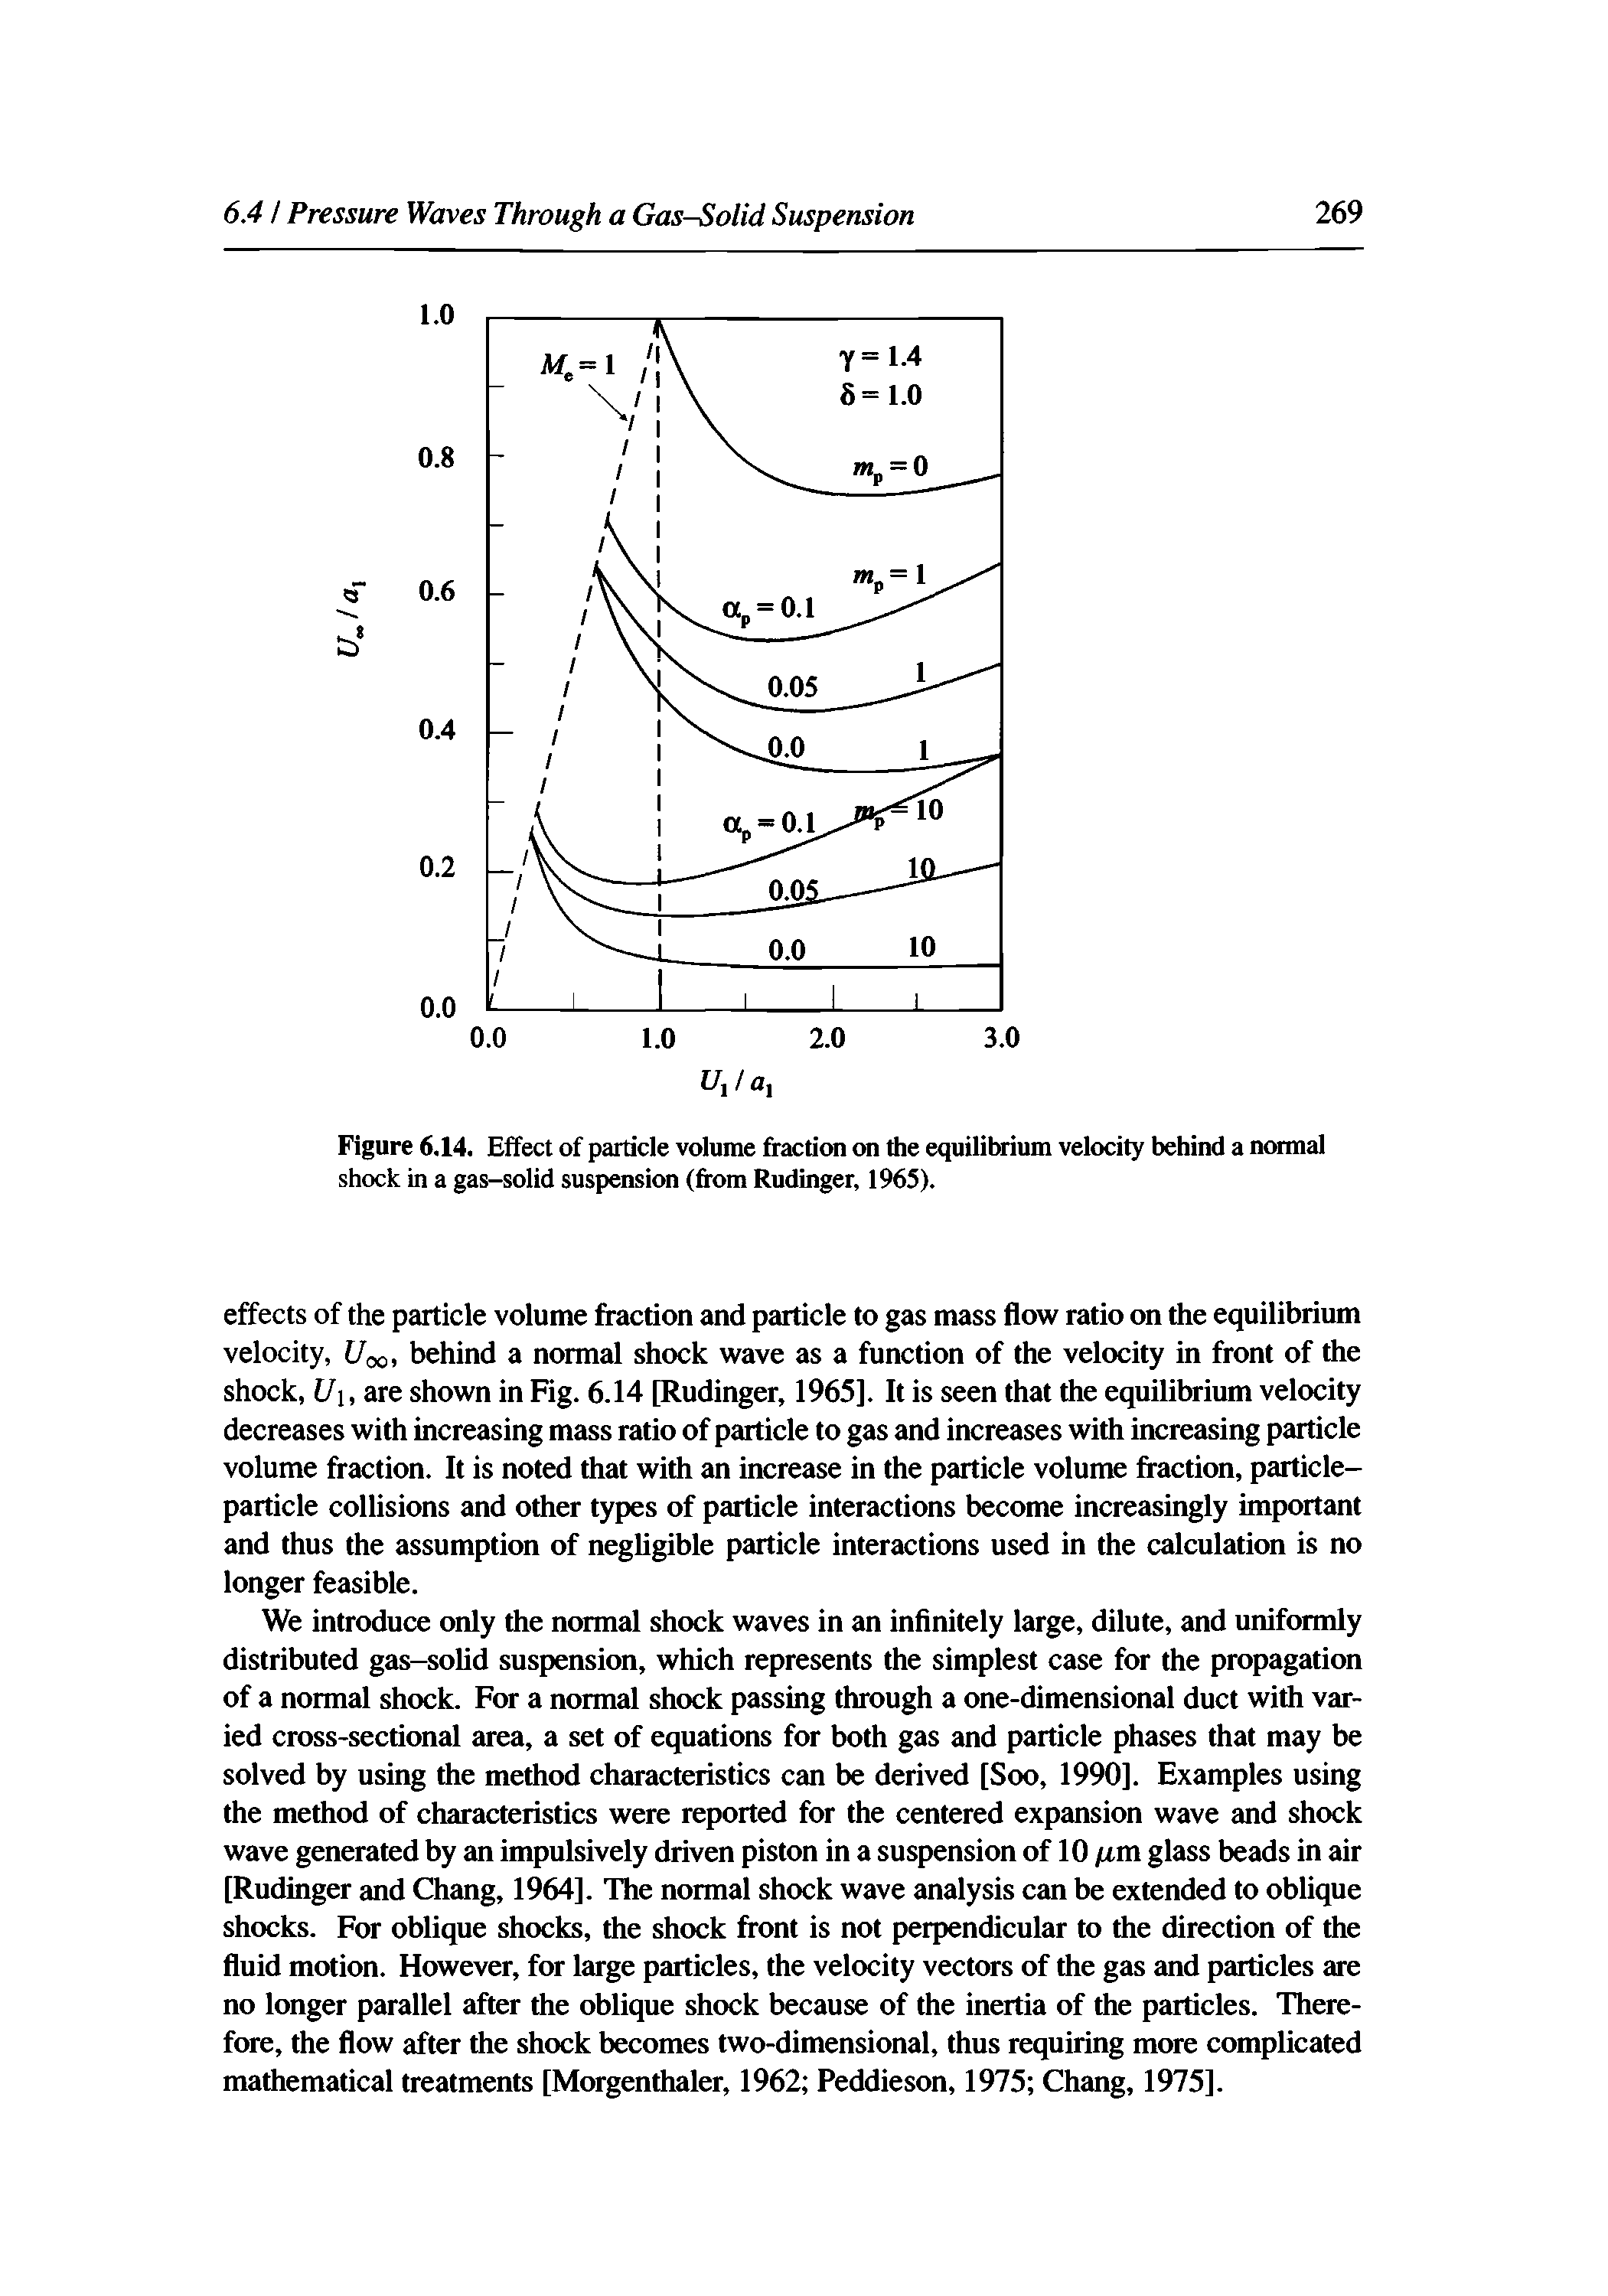 Figure 6.14. Effect of particle volume fraction on the equilibrium velocity behind a normal shock in a gas-solid suspension (from Rudinger, 1965).